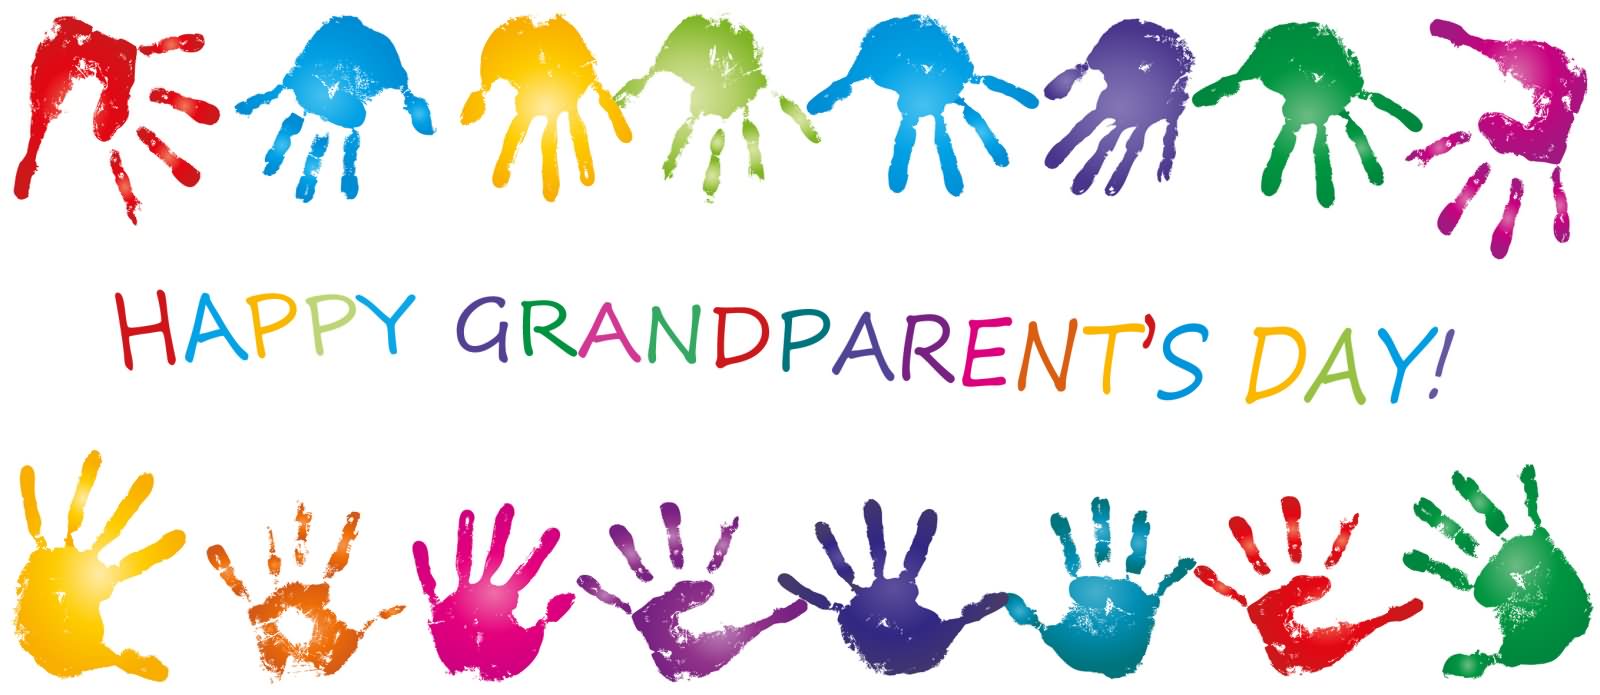 Happy Grandparents Day Colorful Hand Prints Picture